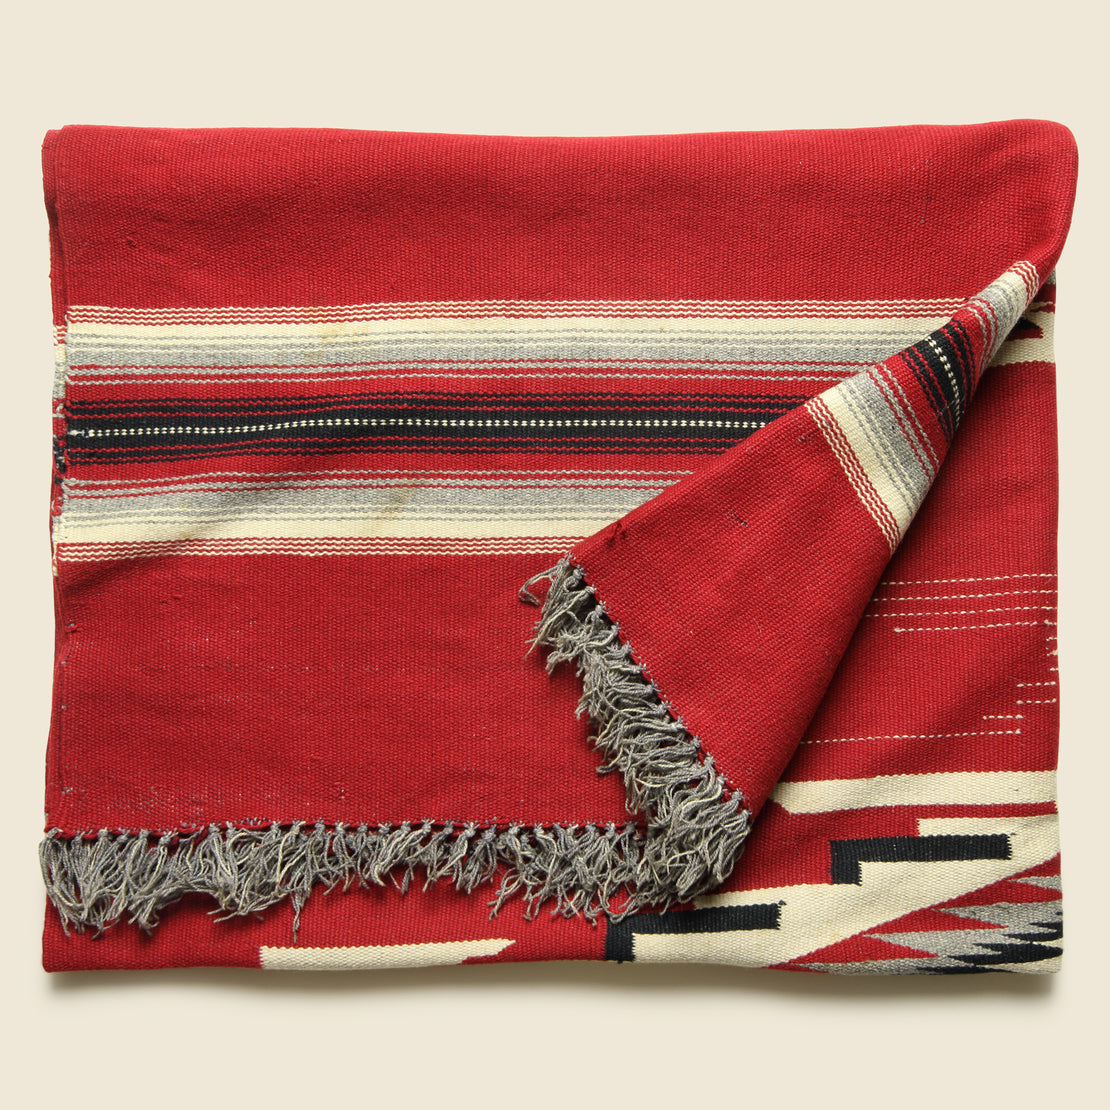 Chimayo Blanket - Vintage - STAG Provisions - One & Done - Blankets & Textiles